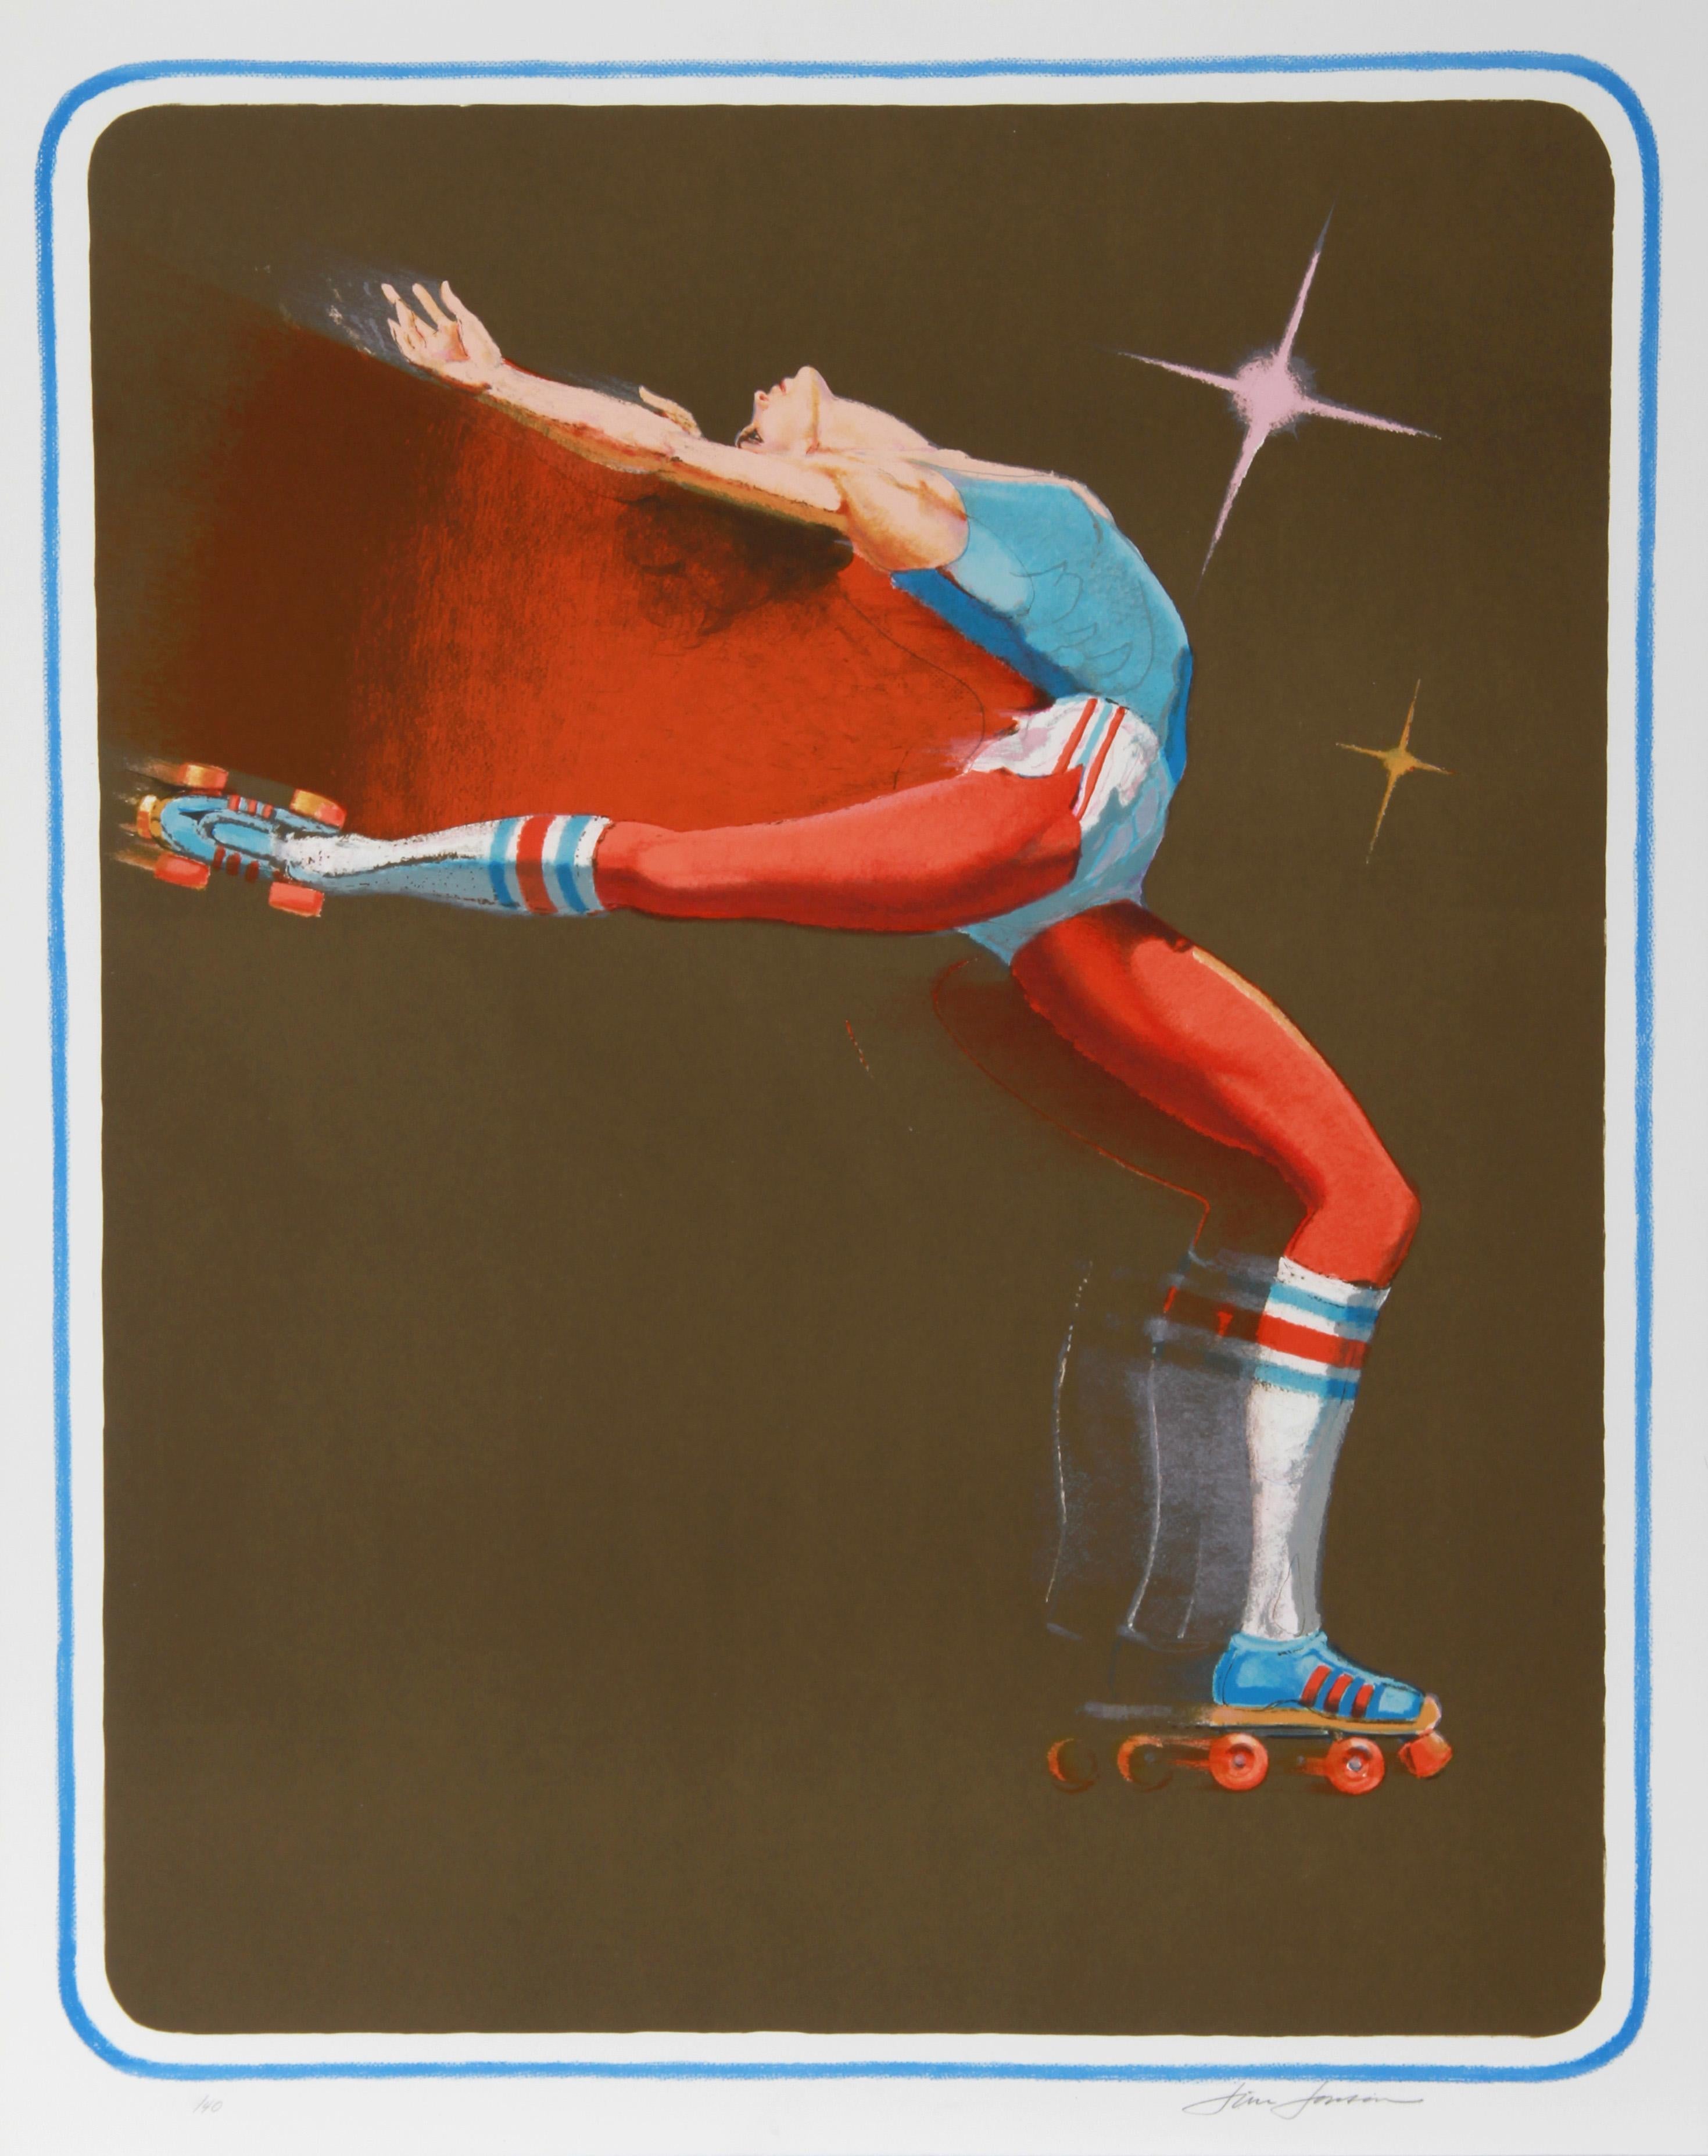 Jim Johnson’s dynamic portrait of a roller skater reflects the skater’s speed and prowess.

Roller Rocket
Jim Jonson, American (1928–1999)
Date: 1979
Lithograph, signed and numbered in pencil
Edition of 300, AP 40
Image Size: 26.5 x 21 inches
Size: